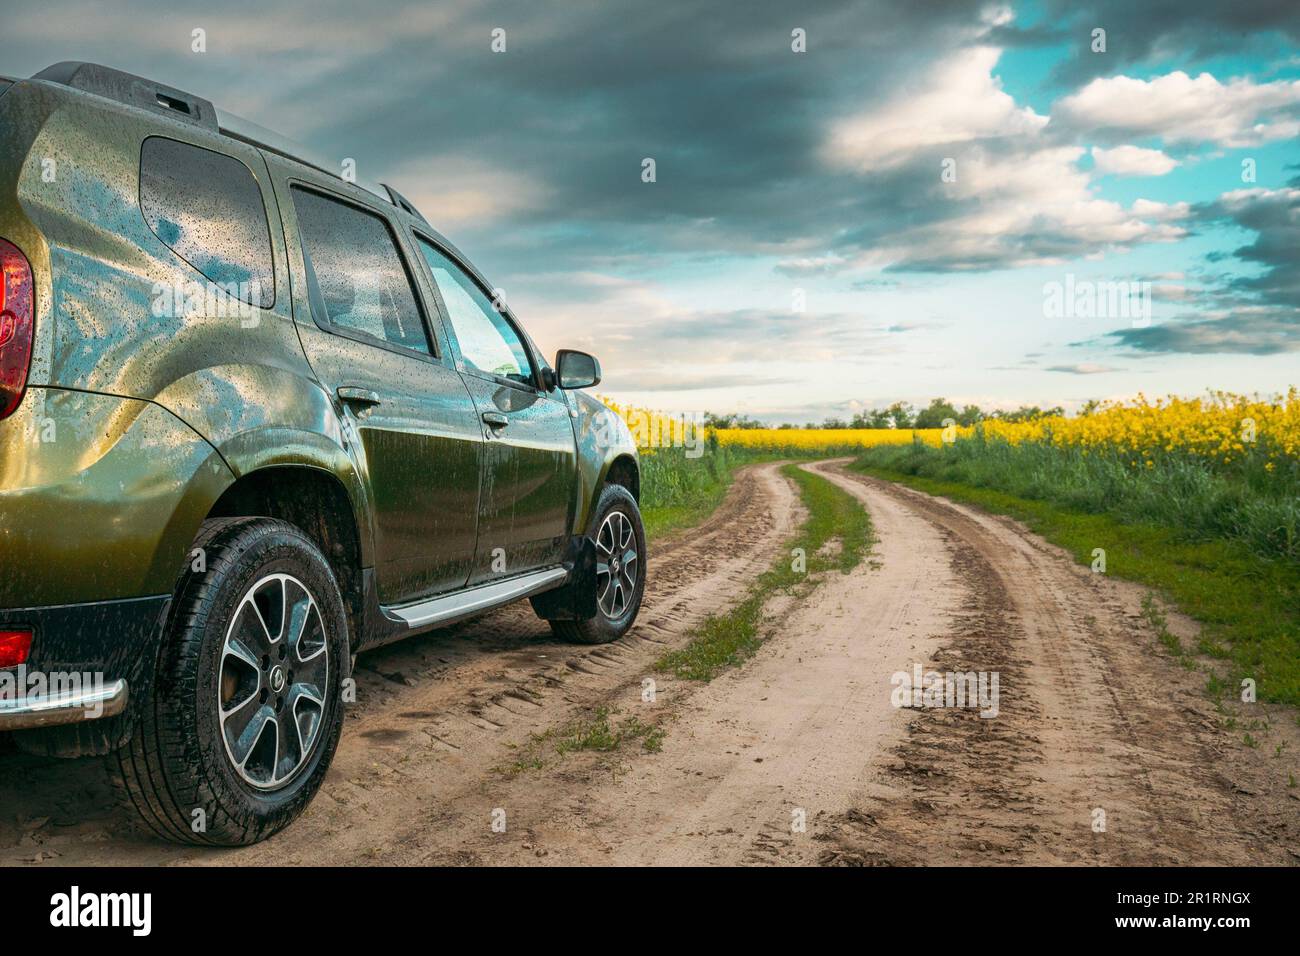 Gomel, Belarus - May 20, 2020: Car Renault Duster Or Dacia Duster Suv In Summer Rapeseed Field Countryside Landscape On Background Bright Light Blue Stock Photo